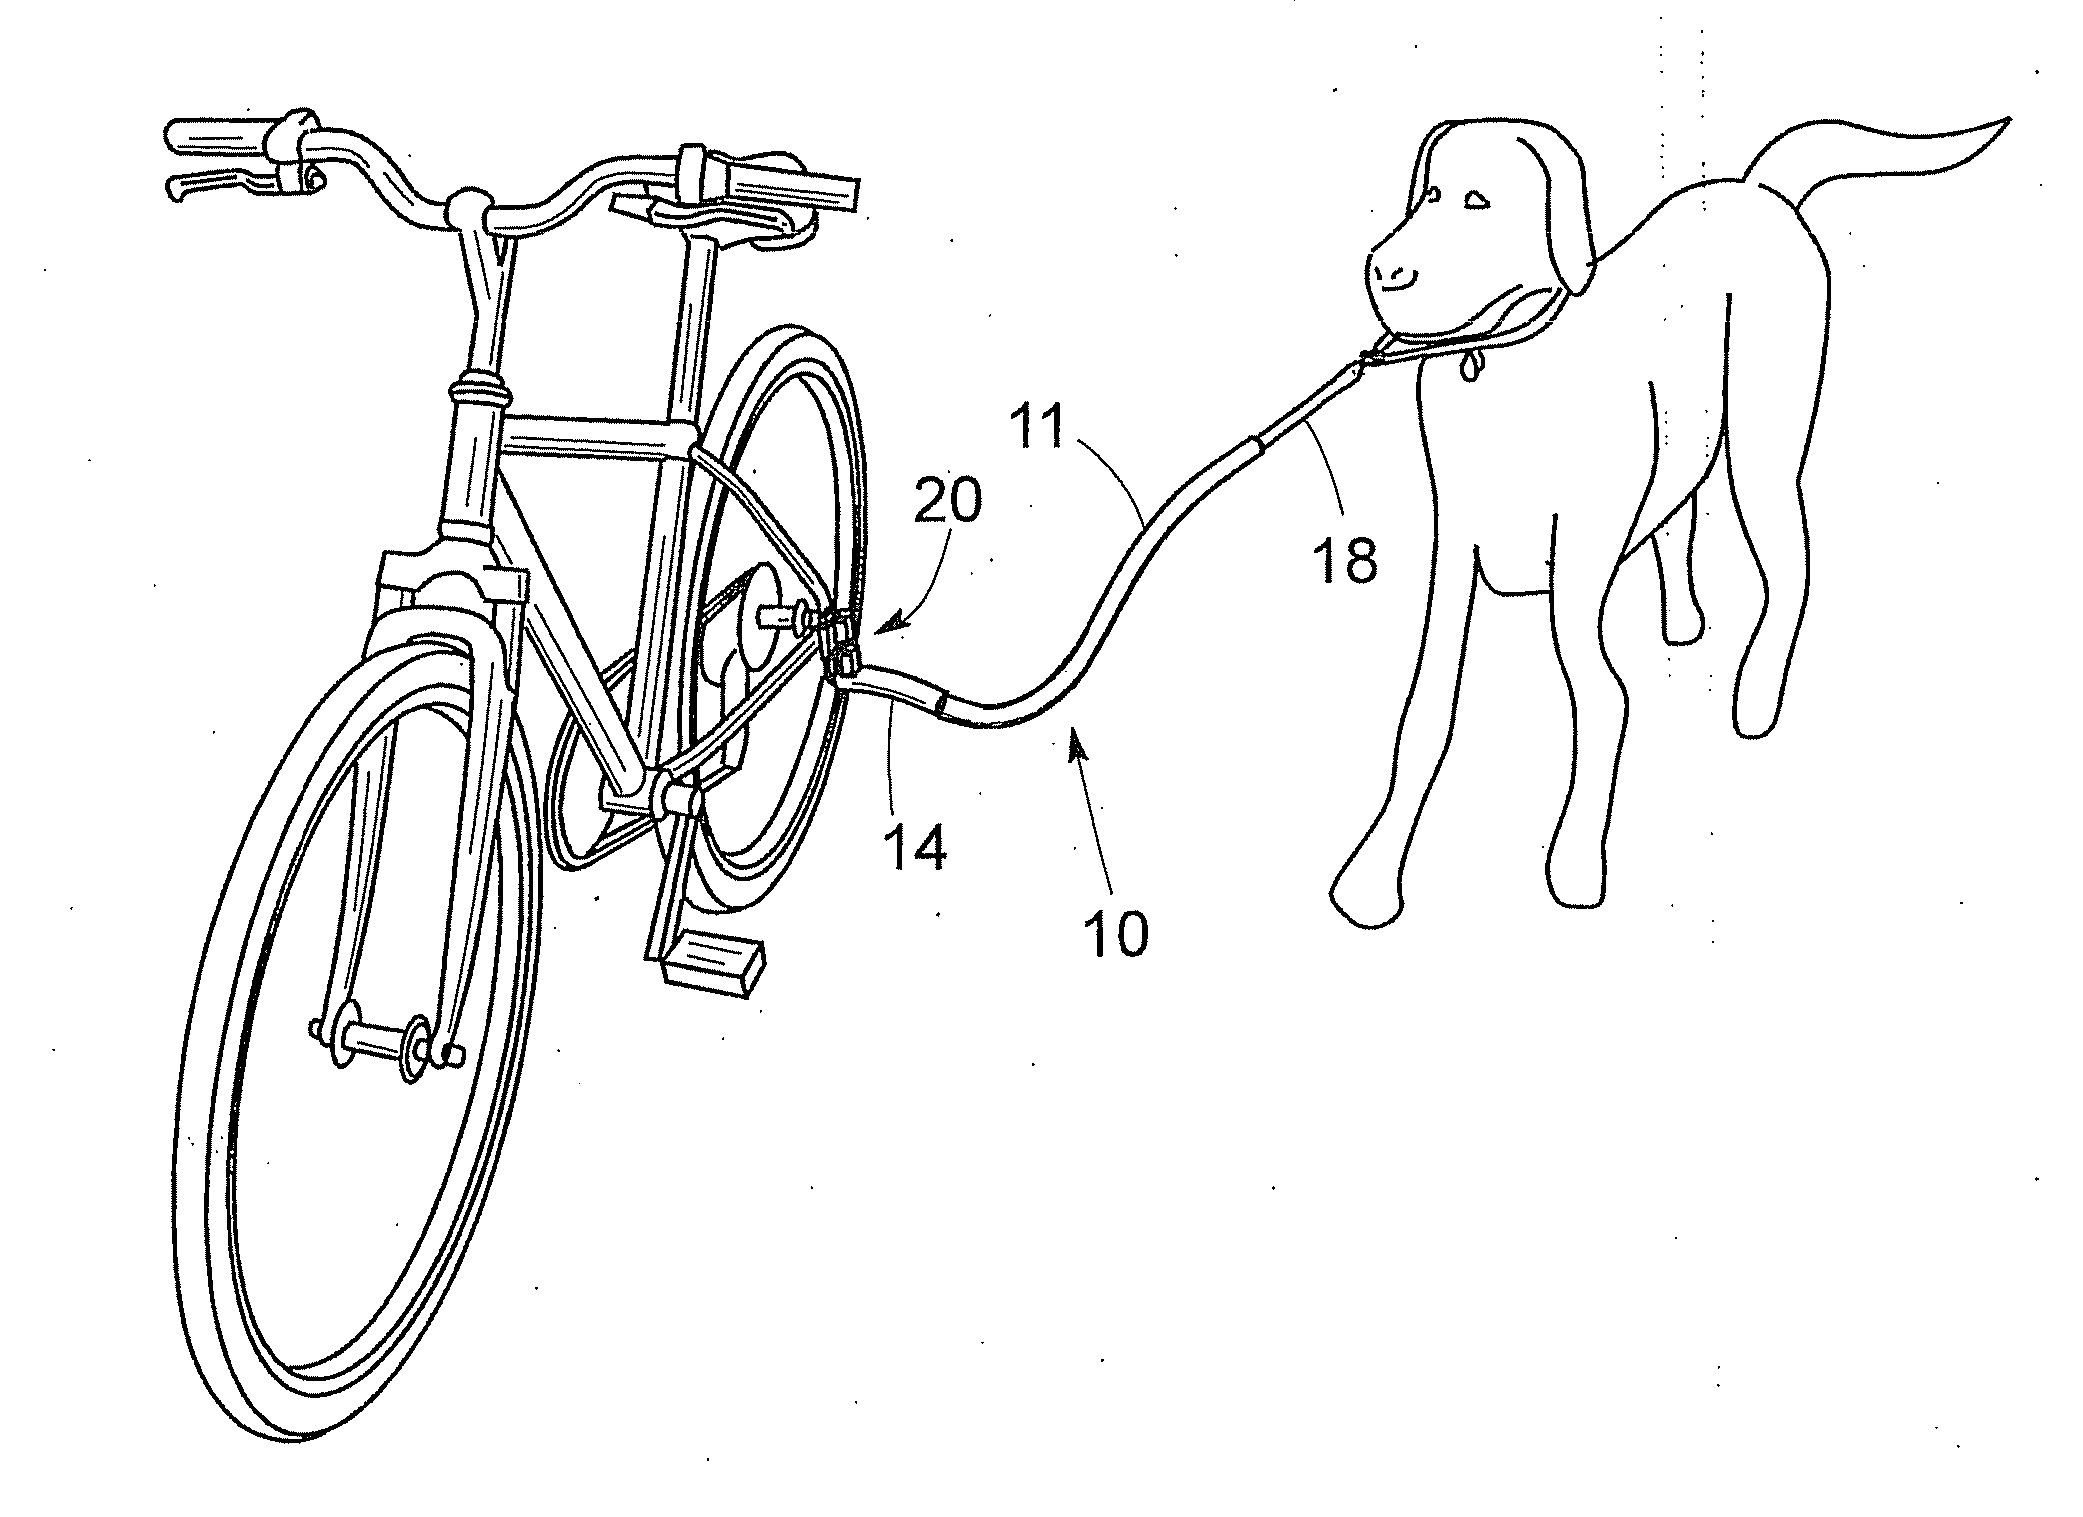 Personal carrier-mounted dog leash with distal stiffener